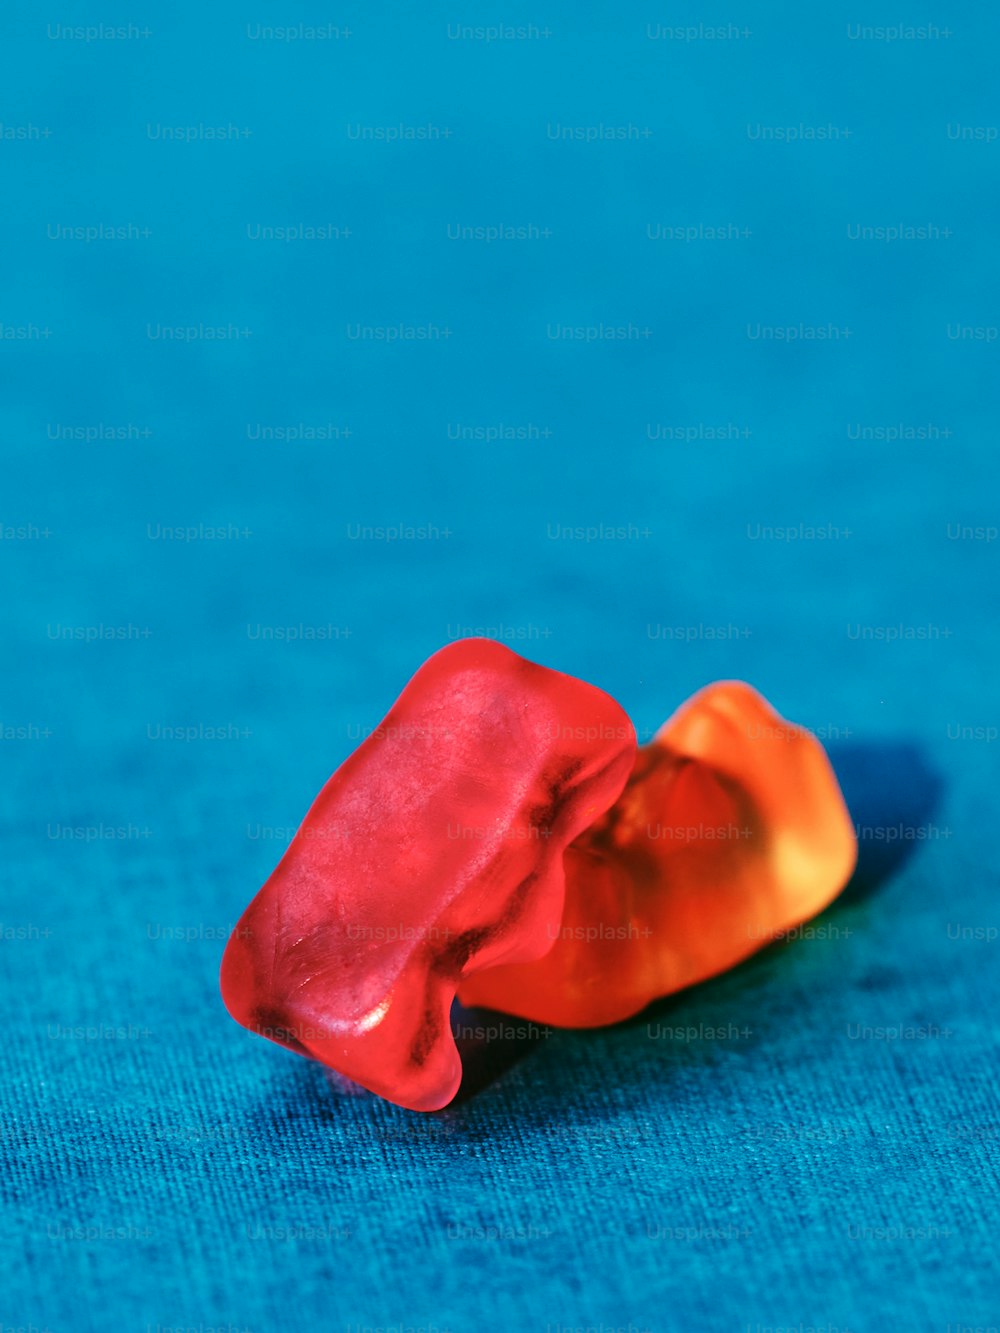 a red and orange object sitting on a blue surface